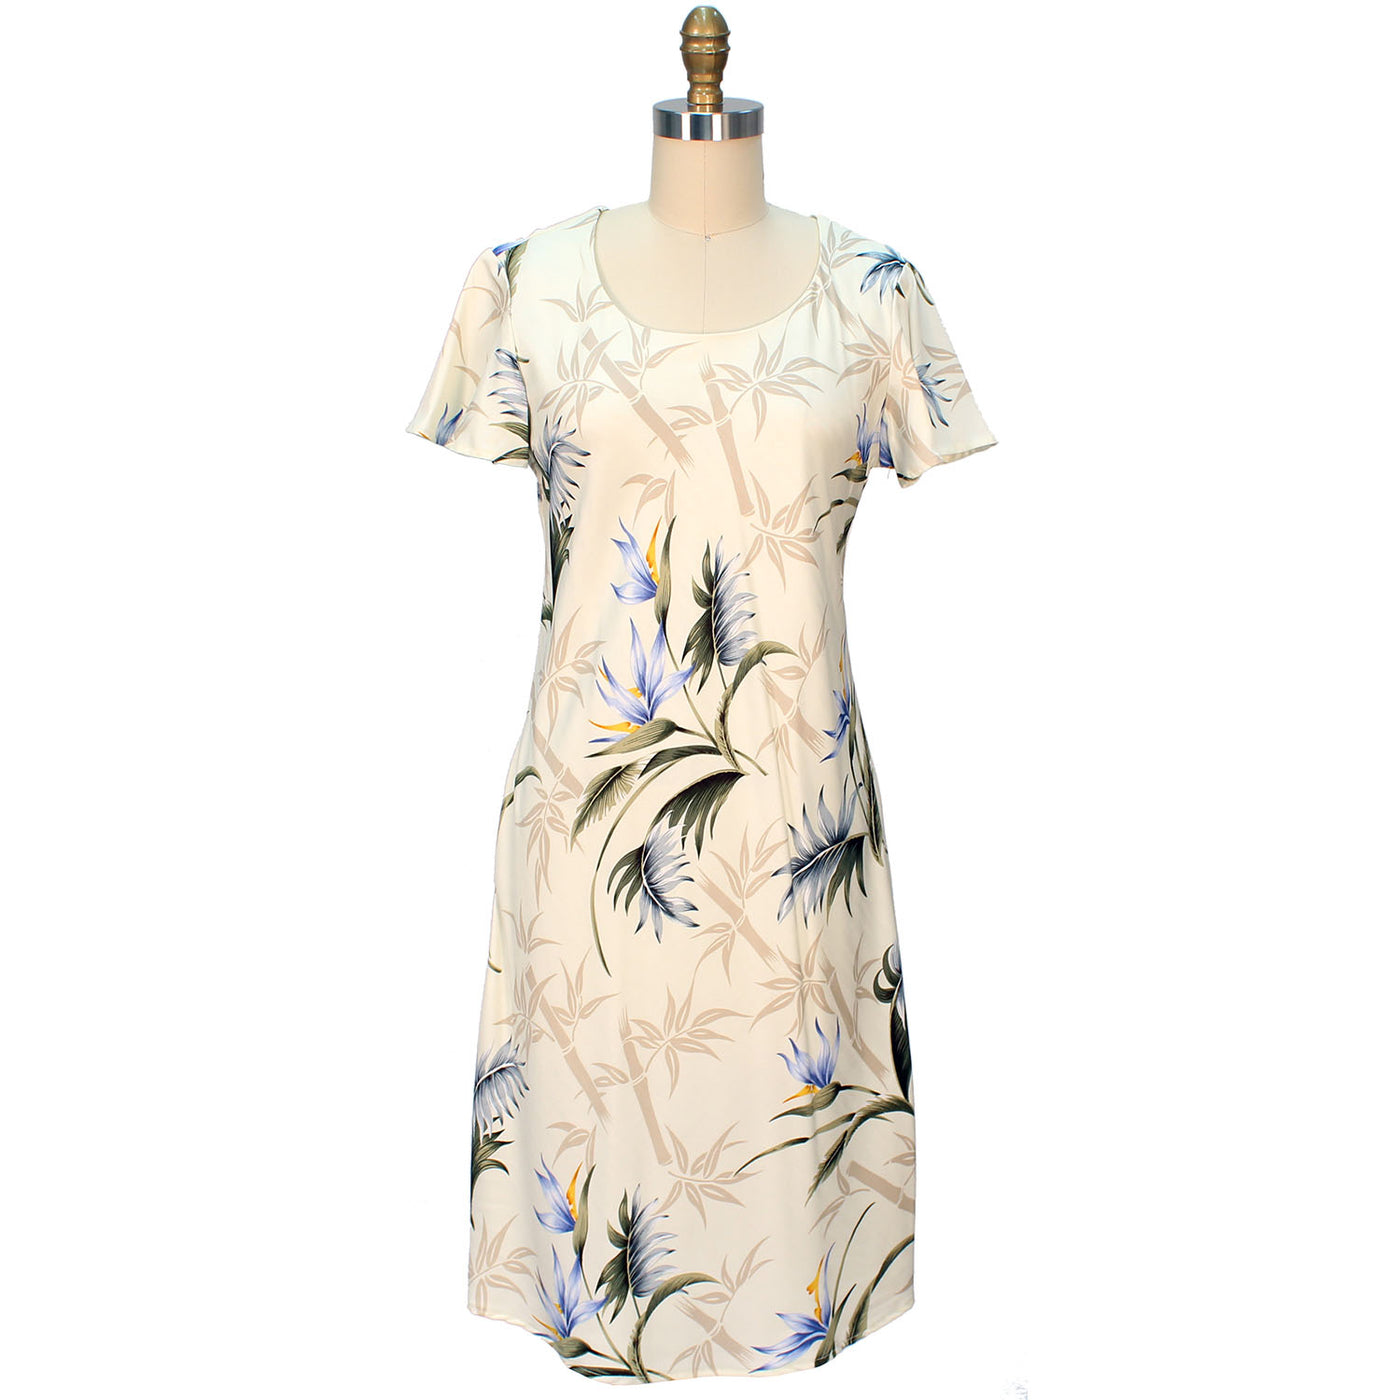 Bamboo Paradise Cream A-Line Dress with Cap Sleeves